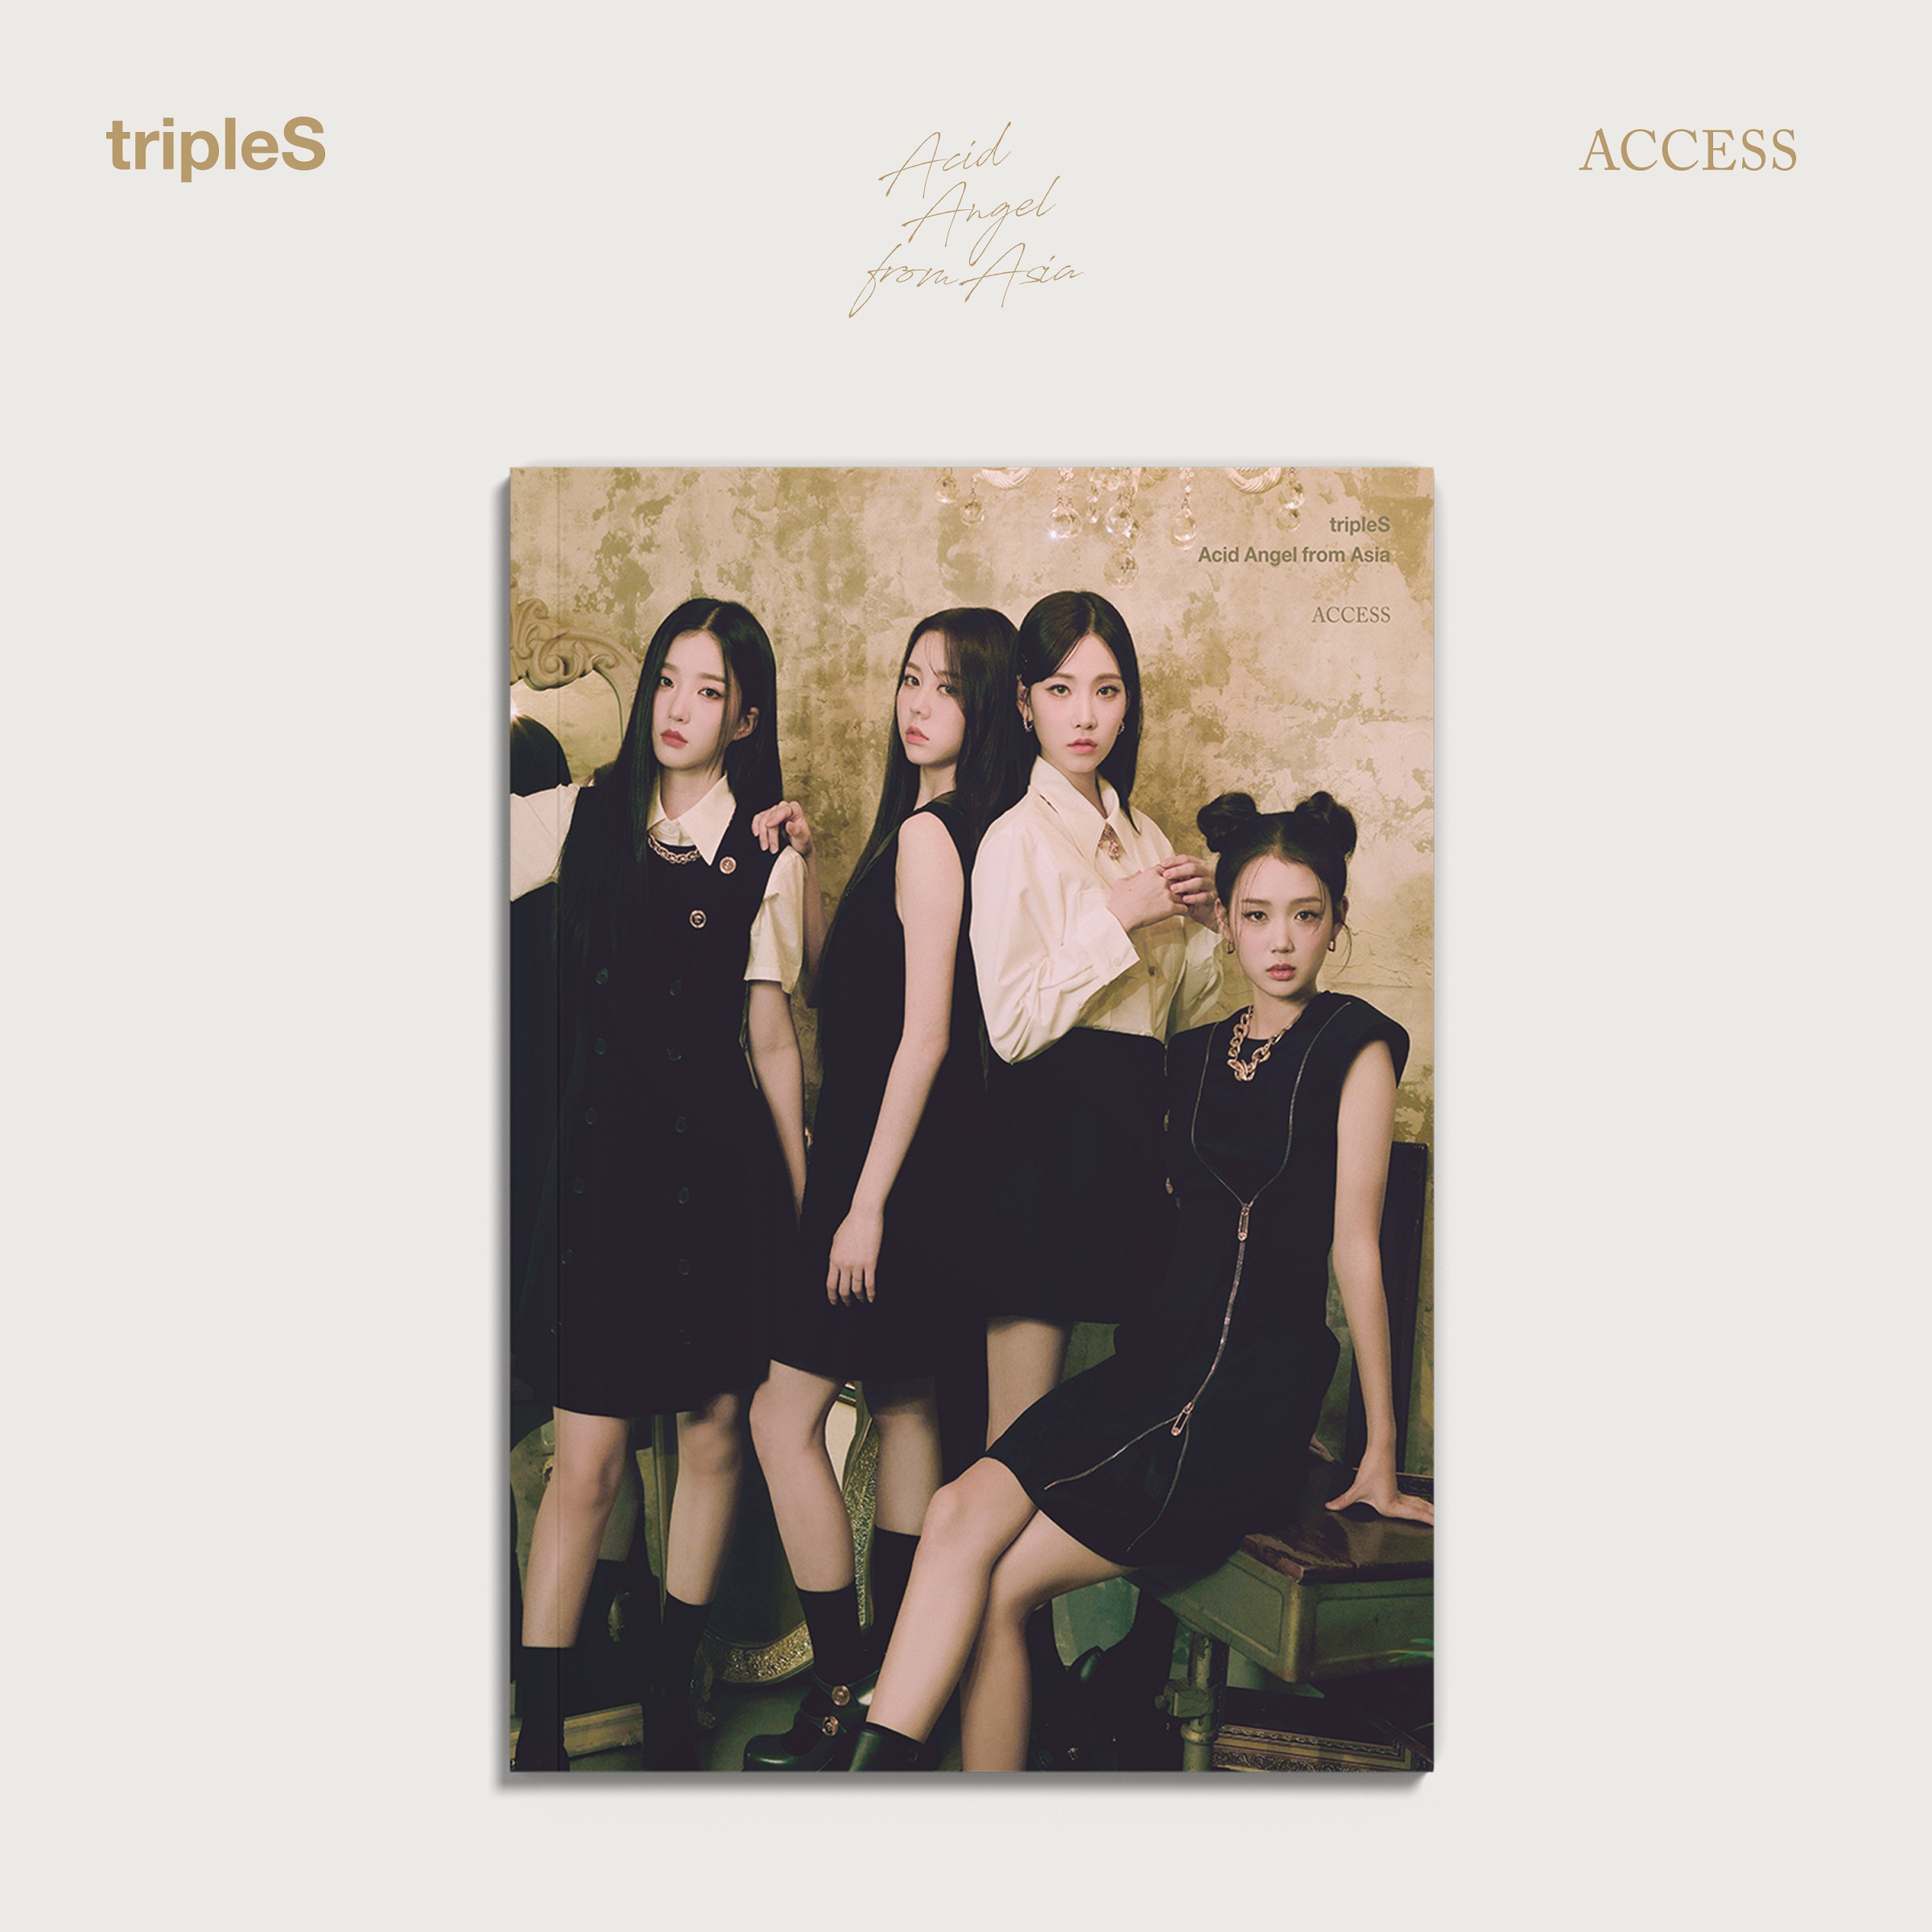 [nugupromoter] tripleS - Acid Angel from Asia [ACCESS] (B ver.)